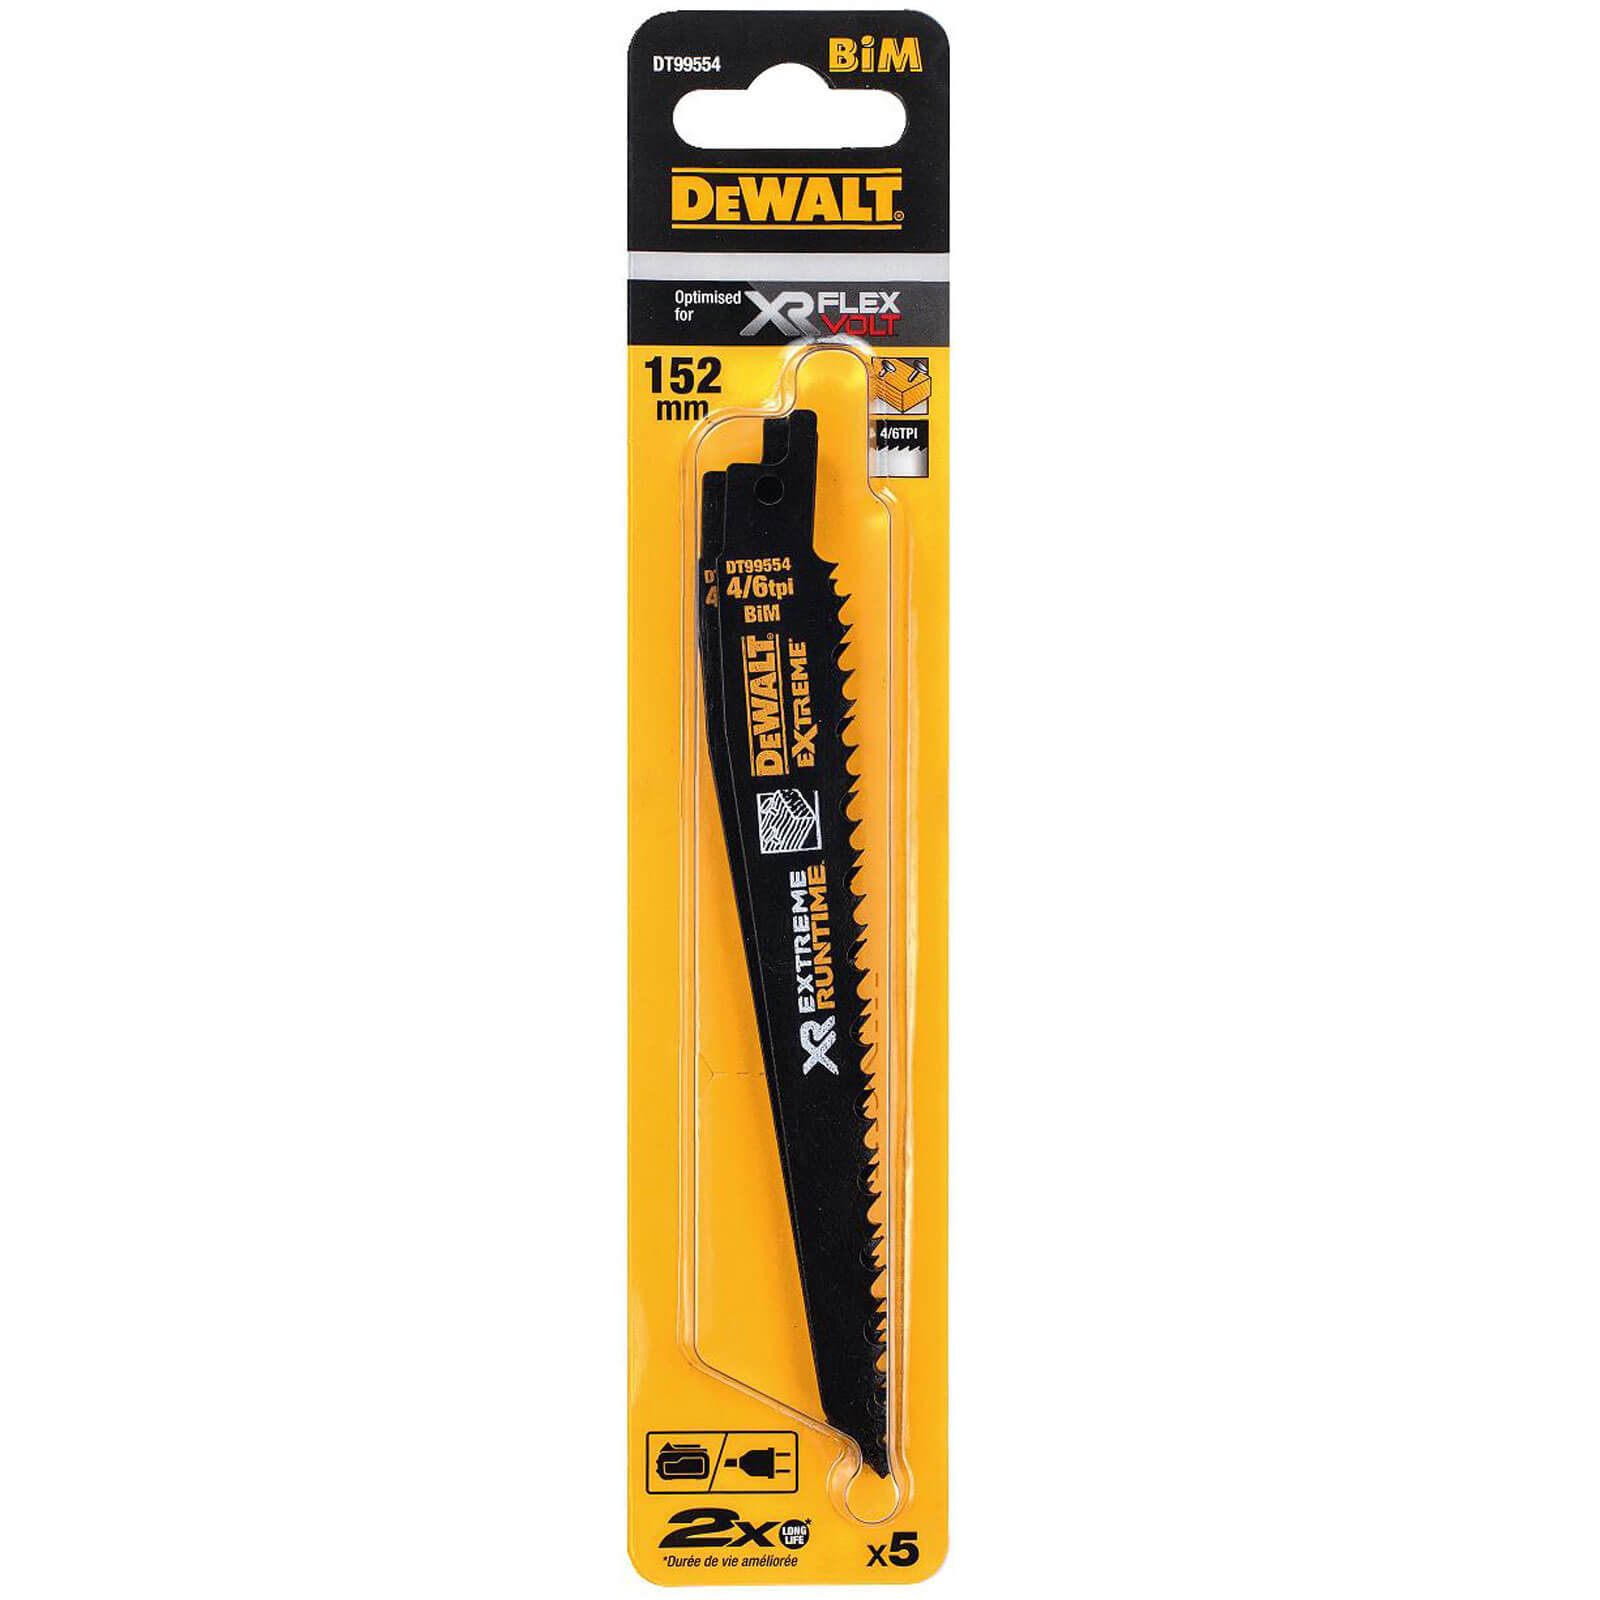 Photos - Power Tool Accessory DeWALT Extreme Runtime Wood Cutting Reciprocating Sabre Saw Blades 152mm P 